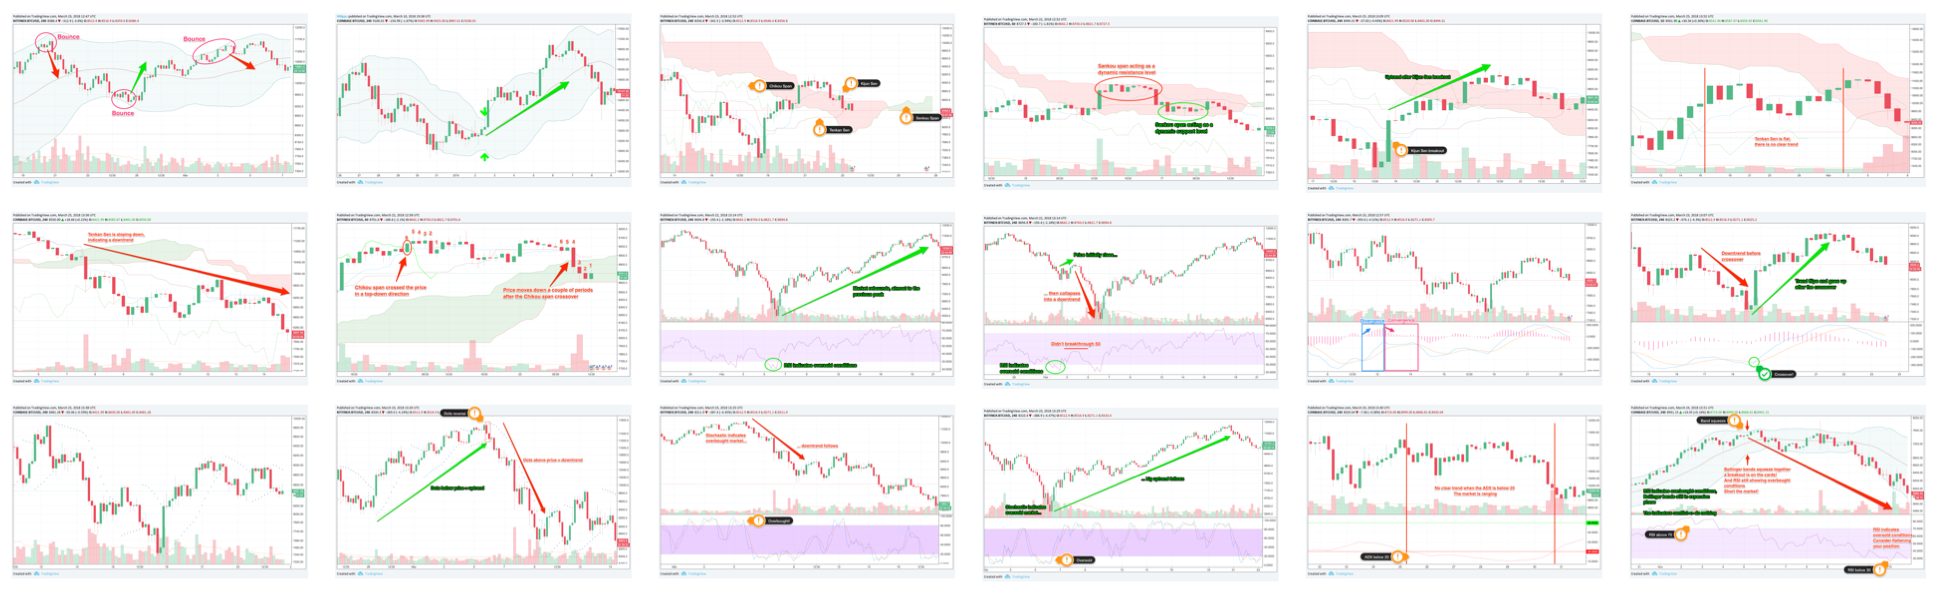 A collage of graphs used by technical traders.